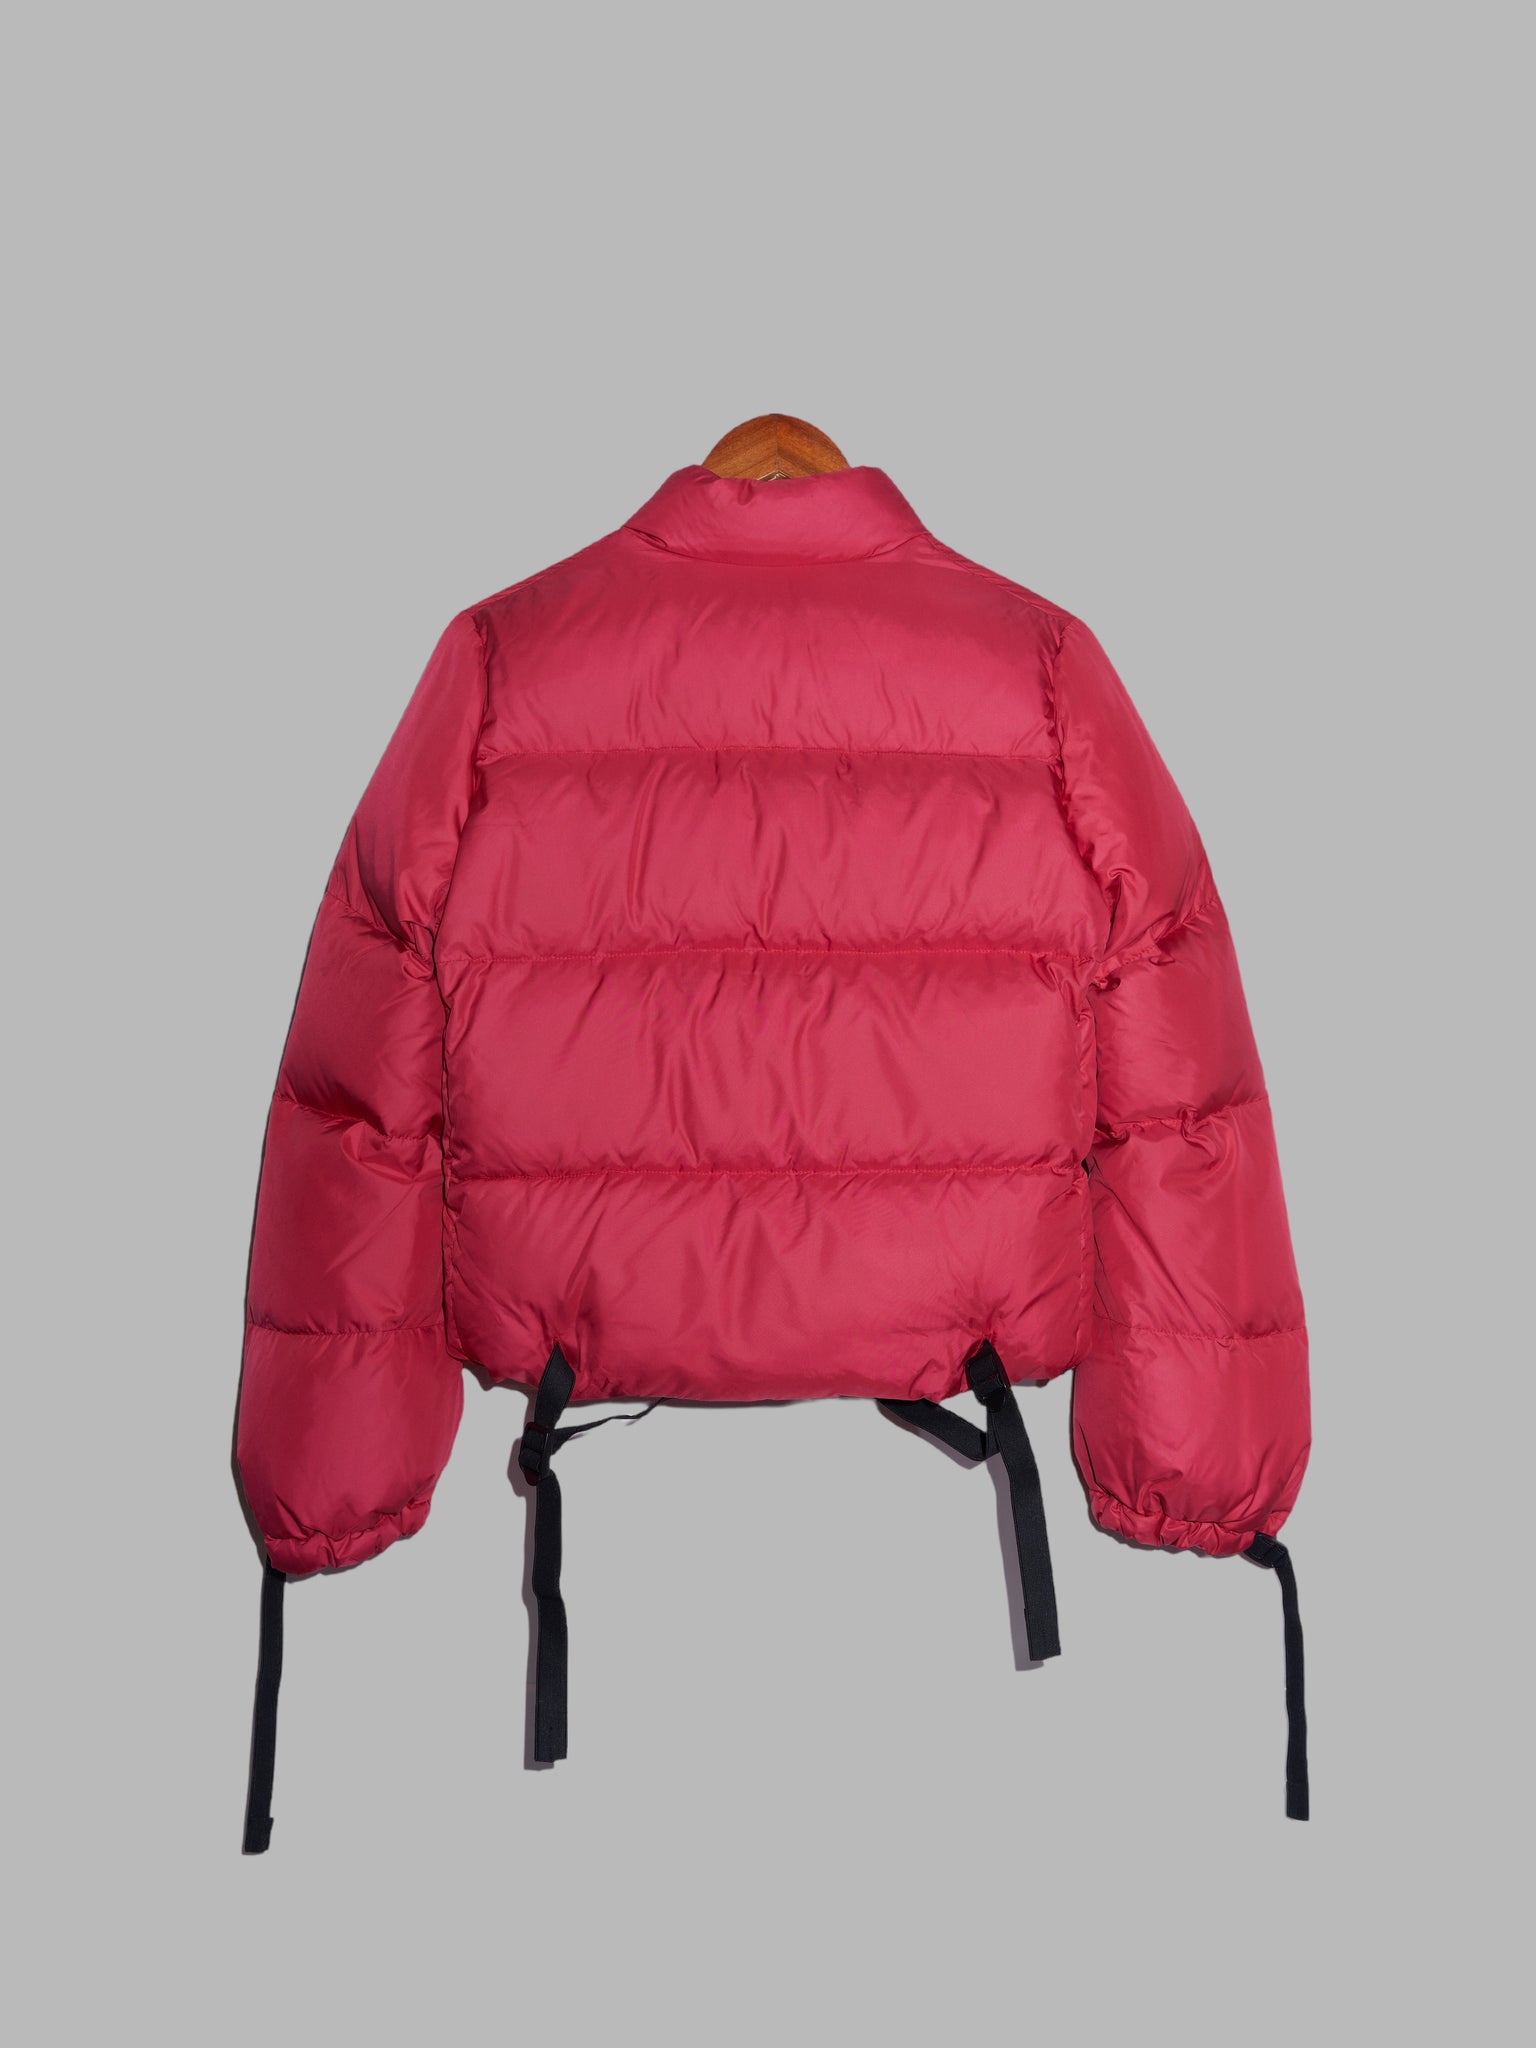 Junya Watanabe Comme des Garcons AW2007 red poly tape detail puffer jacket